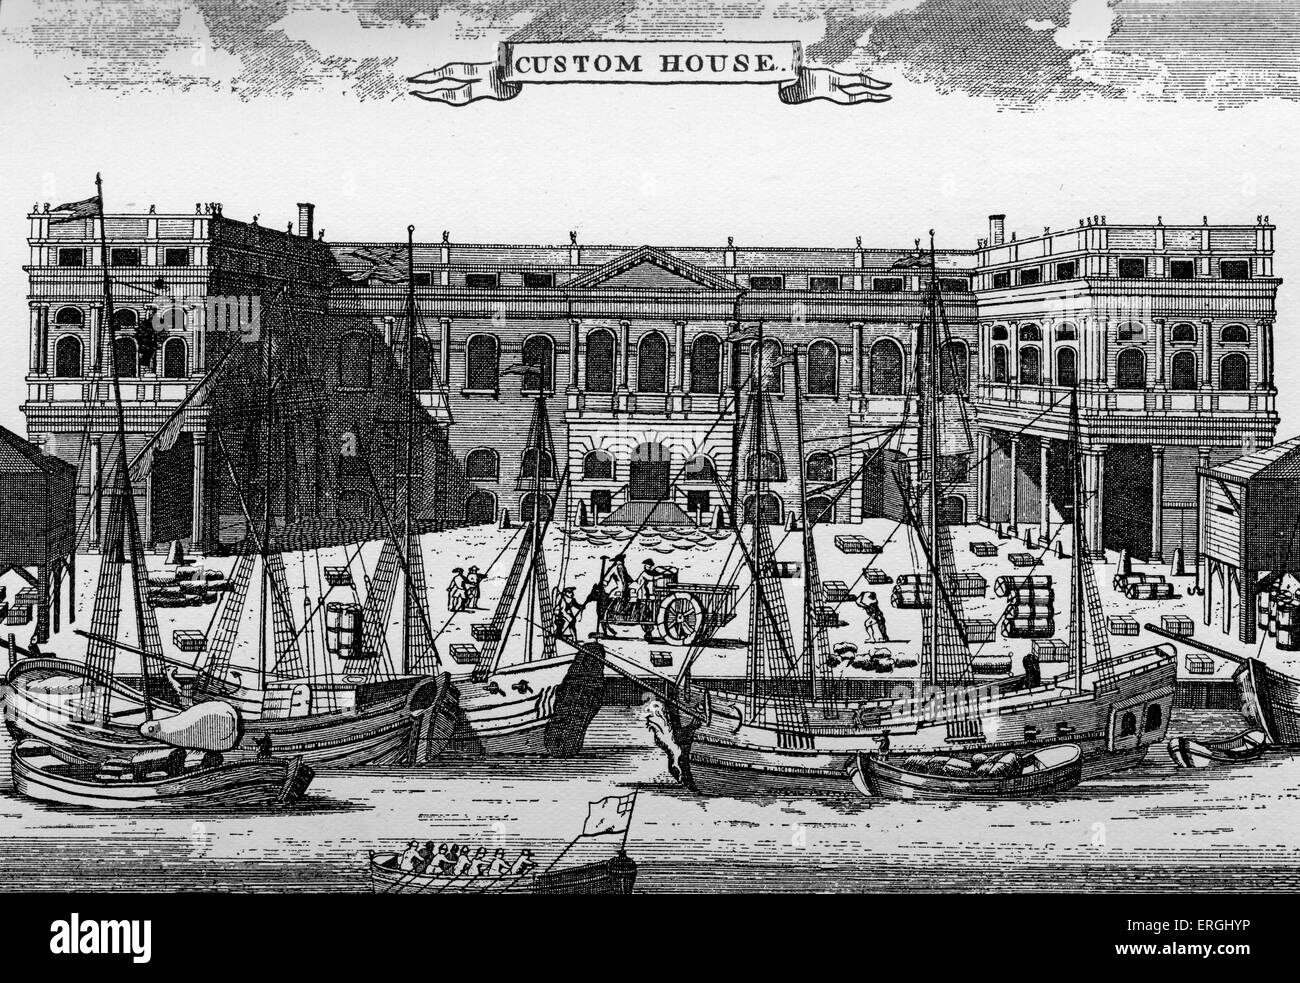 London Custom House - at the beginning of the 18th century. From drawing originally published in 'Several Prospects of the most Stock Photo